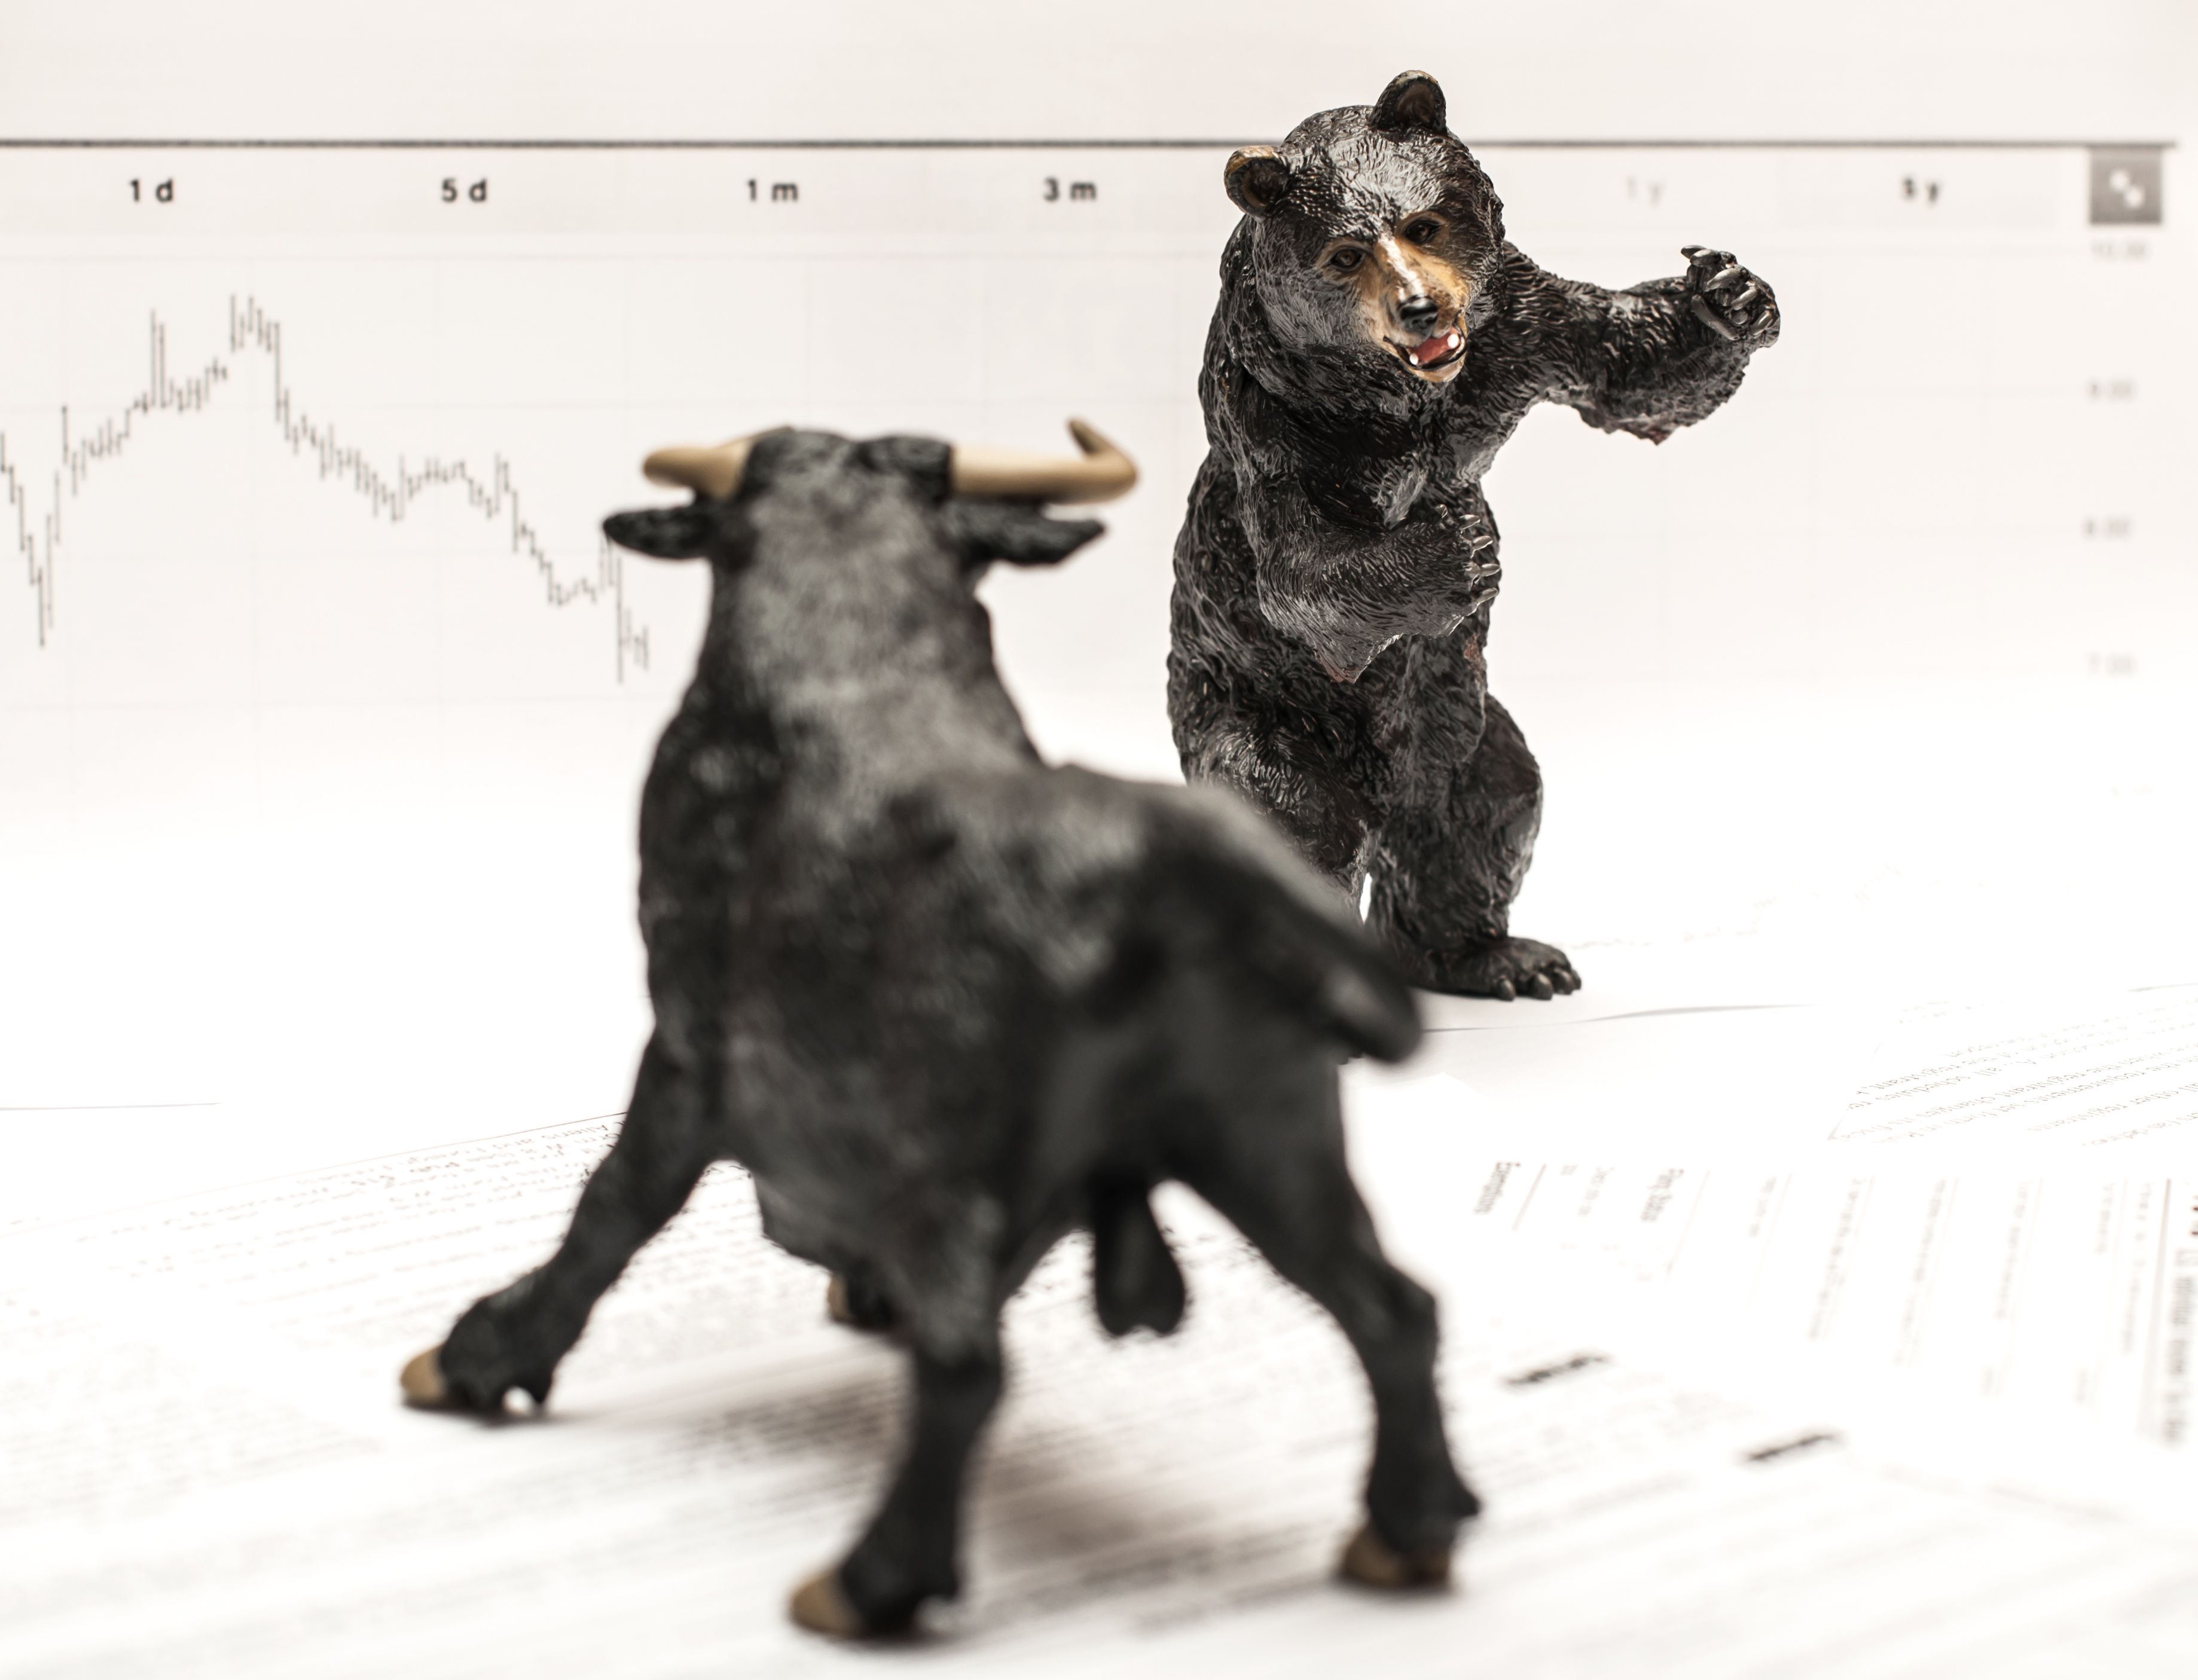 Article image shows a bull and bear circling one another.